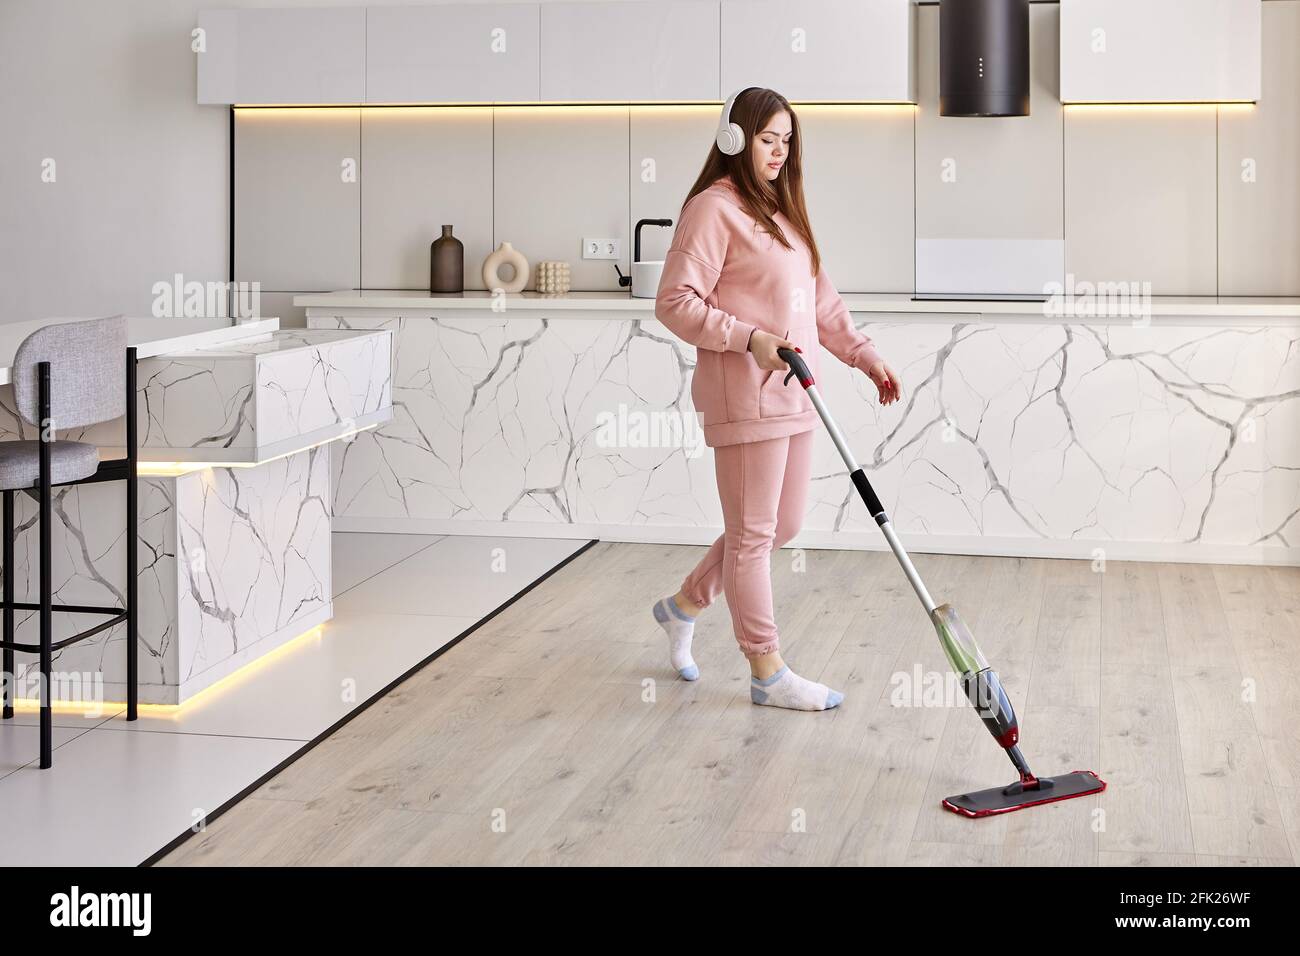 Washing floor using flat mop with microfiber pad and spray bottle, young white woman tidies up kitchen. Stock Photo